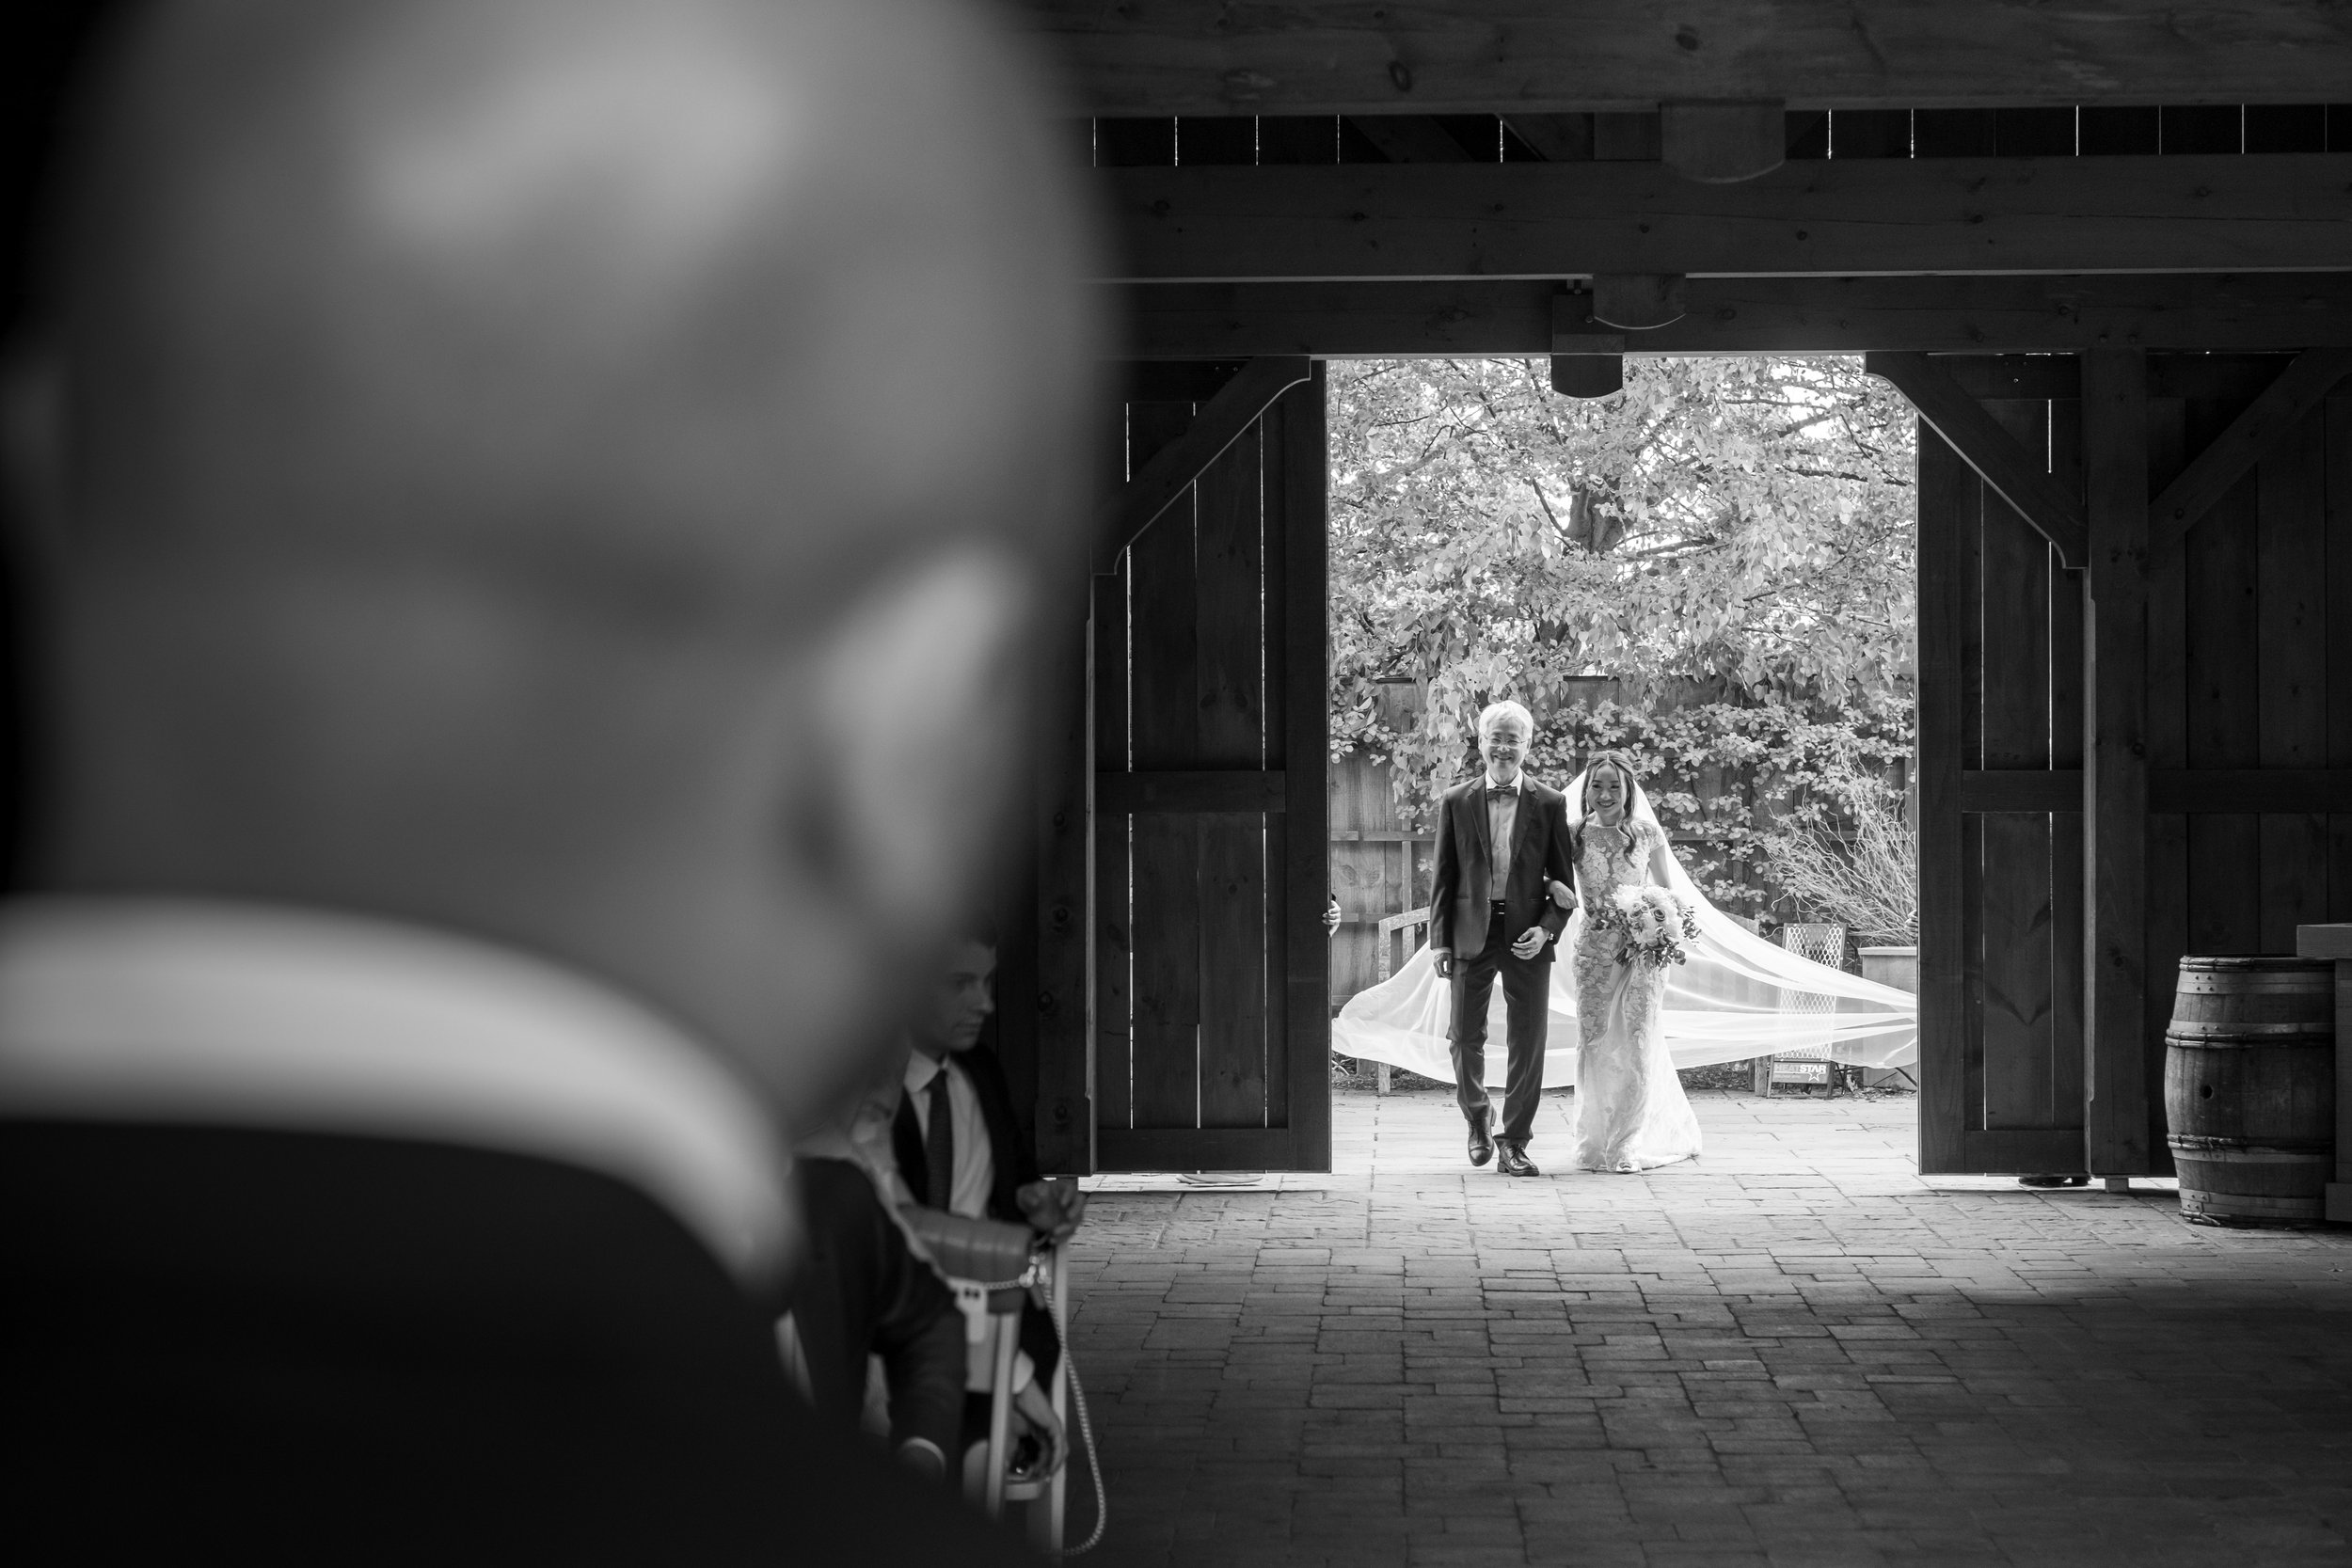  A black and white candid wedding photograph as the bride starts her walk down the aisle during the ceremony from Tiffany + Zoubin’s wedding at Langdon Hall by Toronto Wedding Photographer Scott Williams (www.scottwilliamsphotographer.com) 